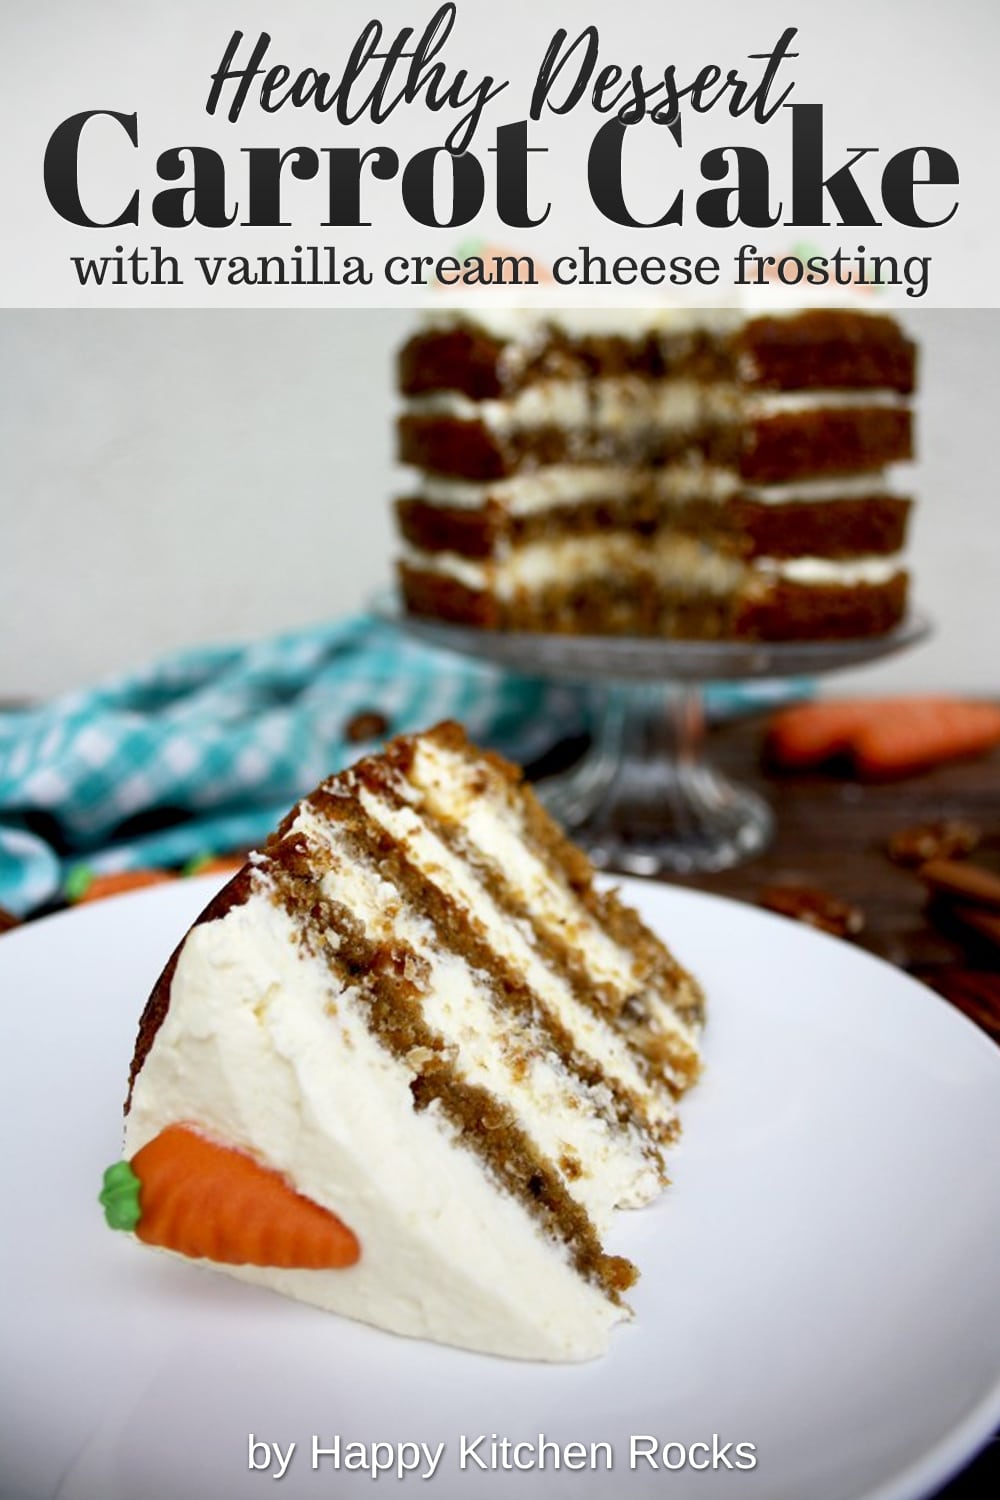 Super Moist Carrot Cake with Vanilla Cream Cheese Frosting One Piece Collage with Text Overlay